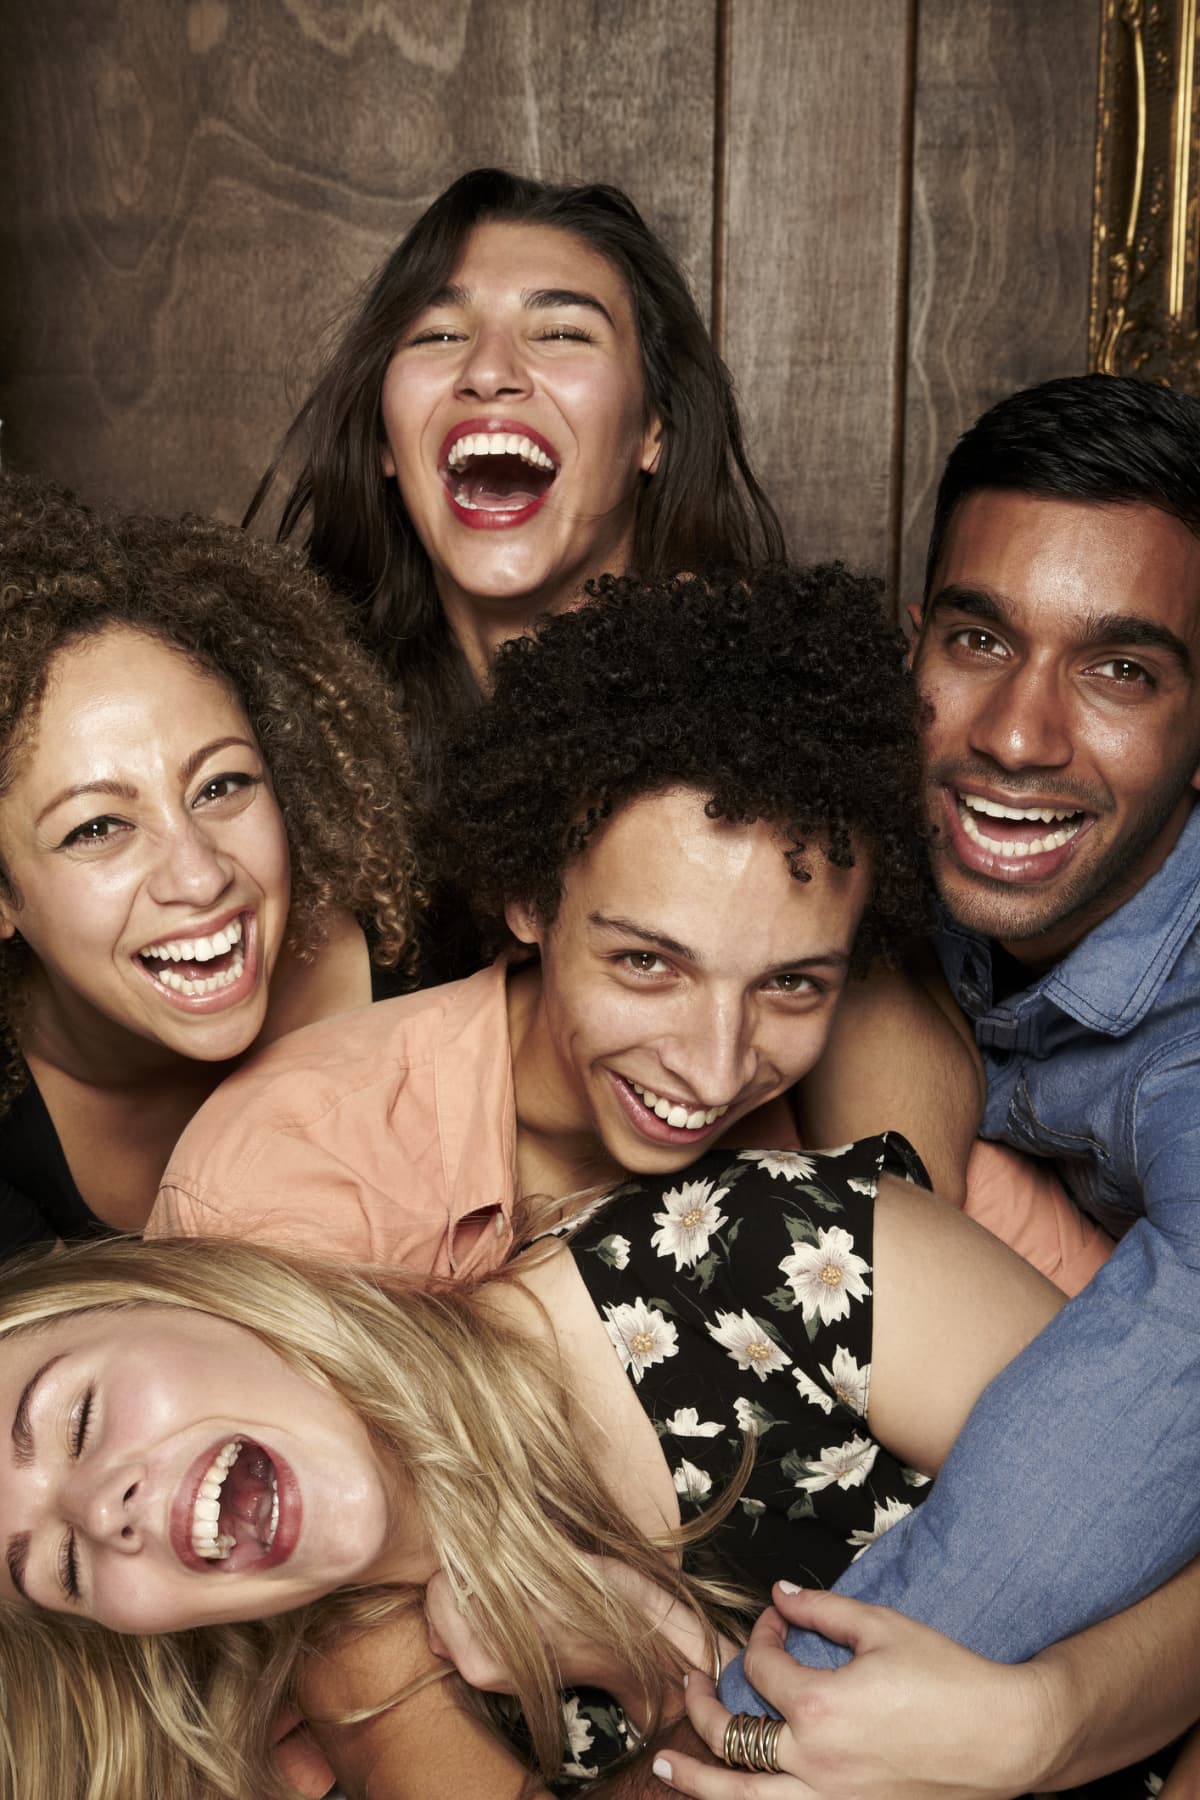 Four friends laughing, against a wooden background